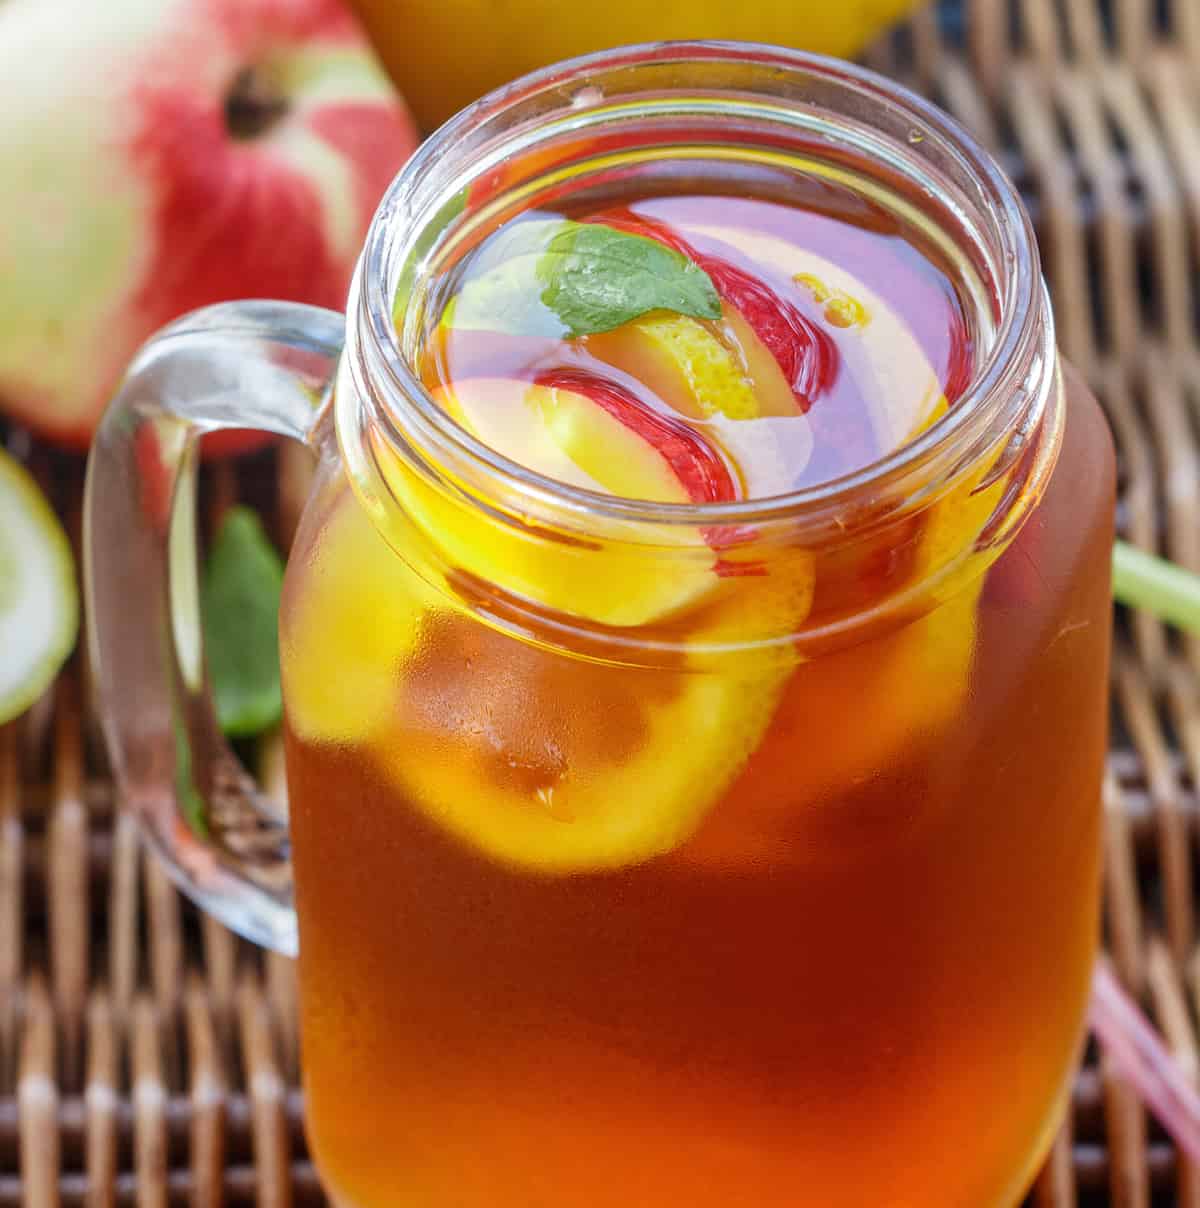 https://www.lifeisbetterwithtea.com/wp-content/uploads/2021/05/peach-iced-tea-square.jpeg